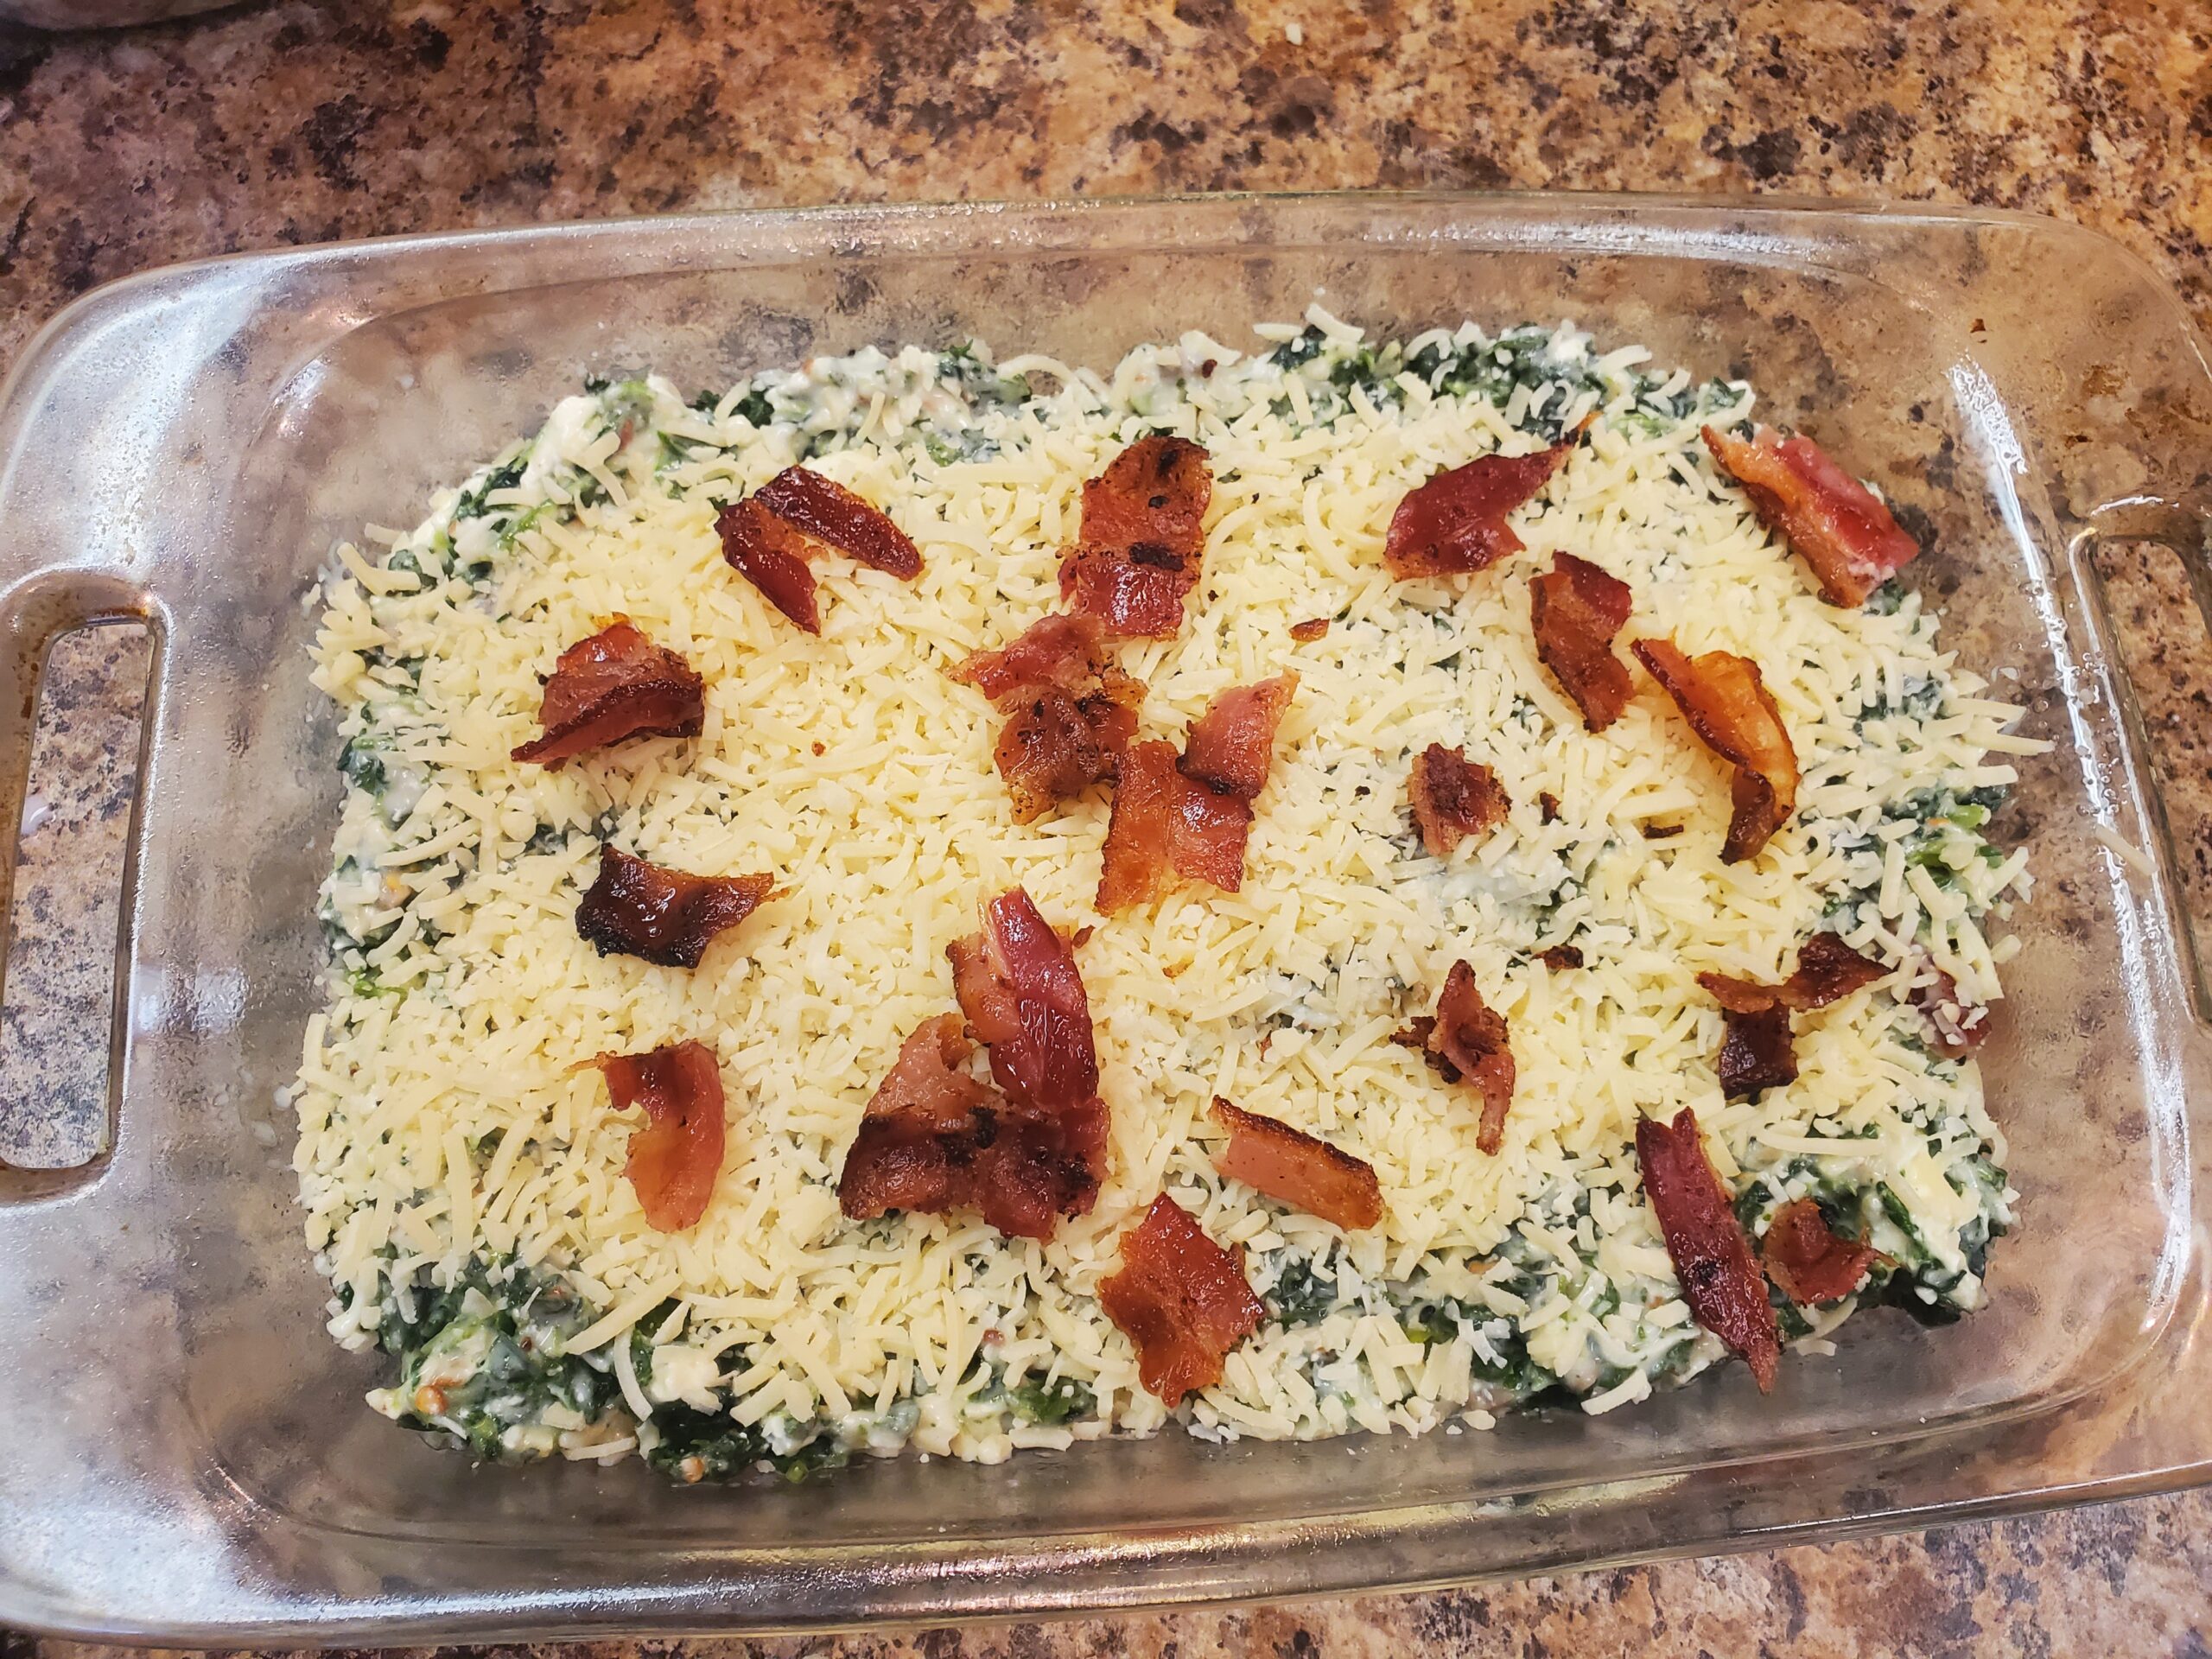 Spinach and Bacon Casrorle